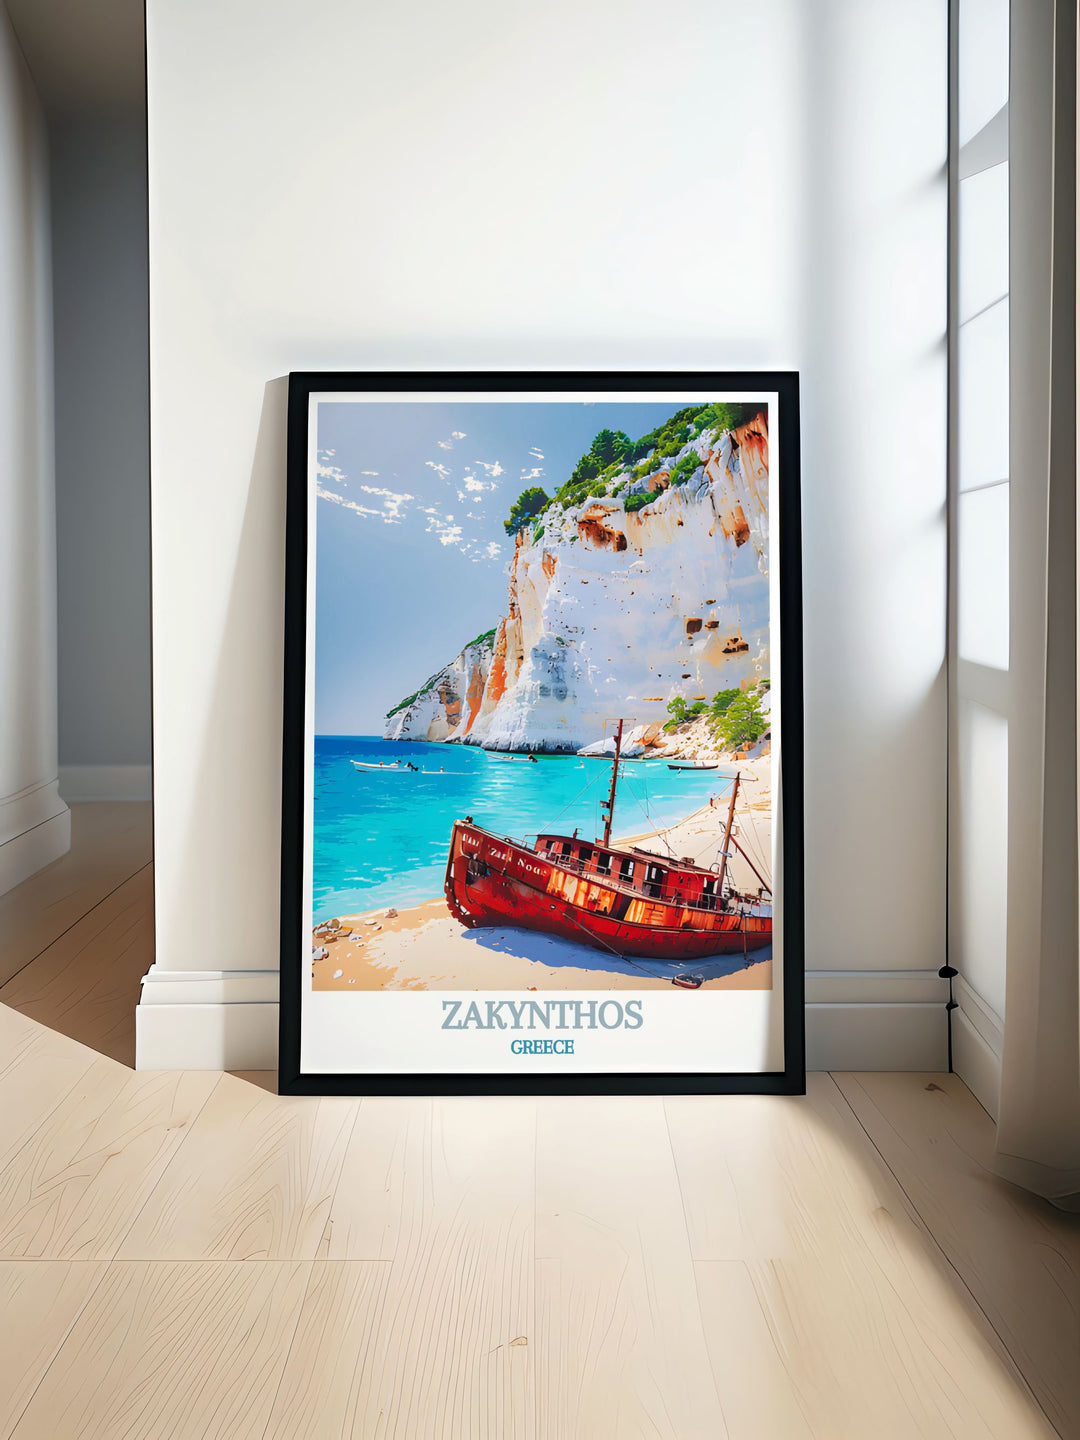 Zakynthos Wall Art featuring the vibrant culture and architectural elegance of Zakynthos Town alongside Navagio Beachs peaceful shores, ideal for adding a touch of Greece to any space.